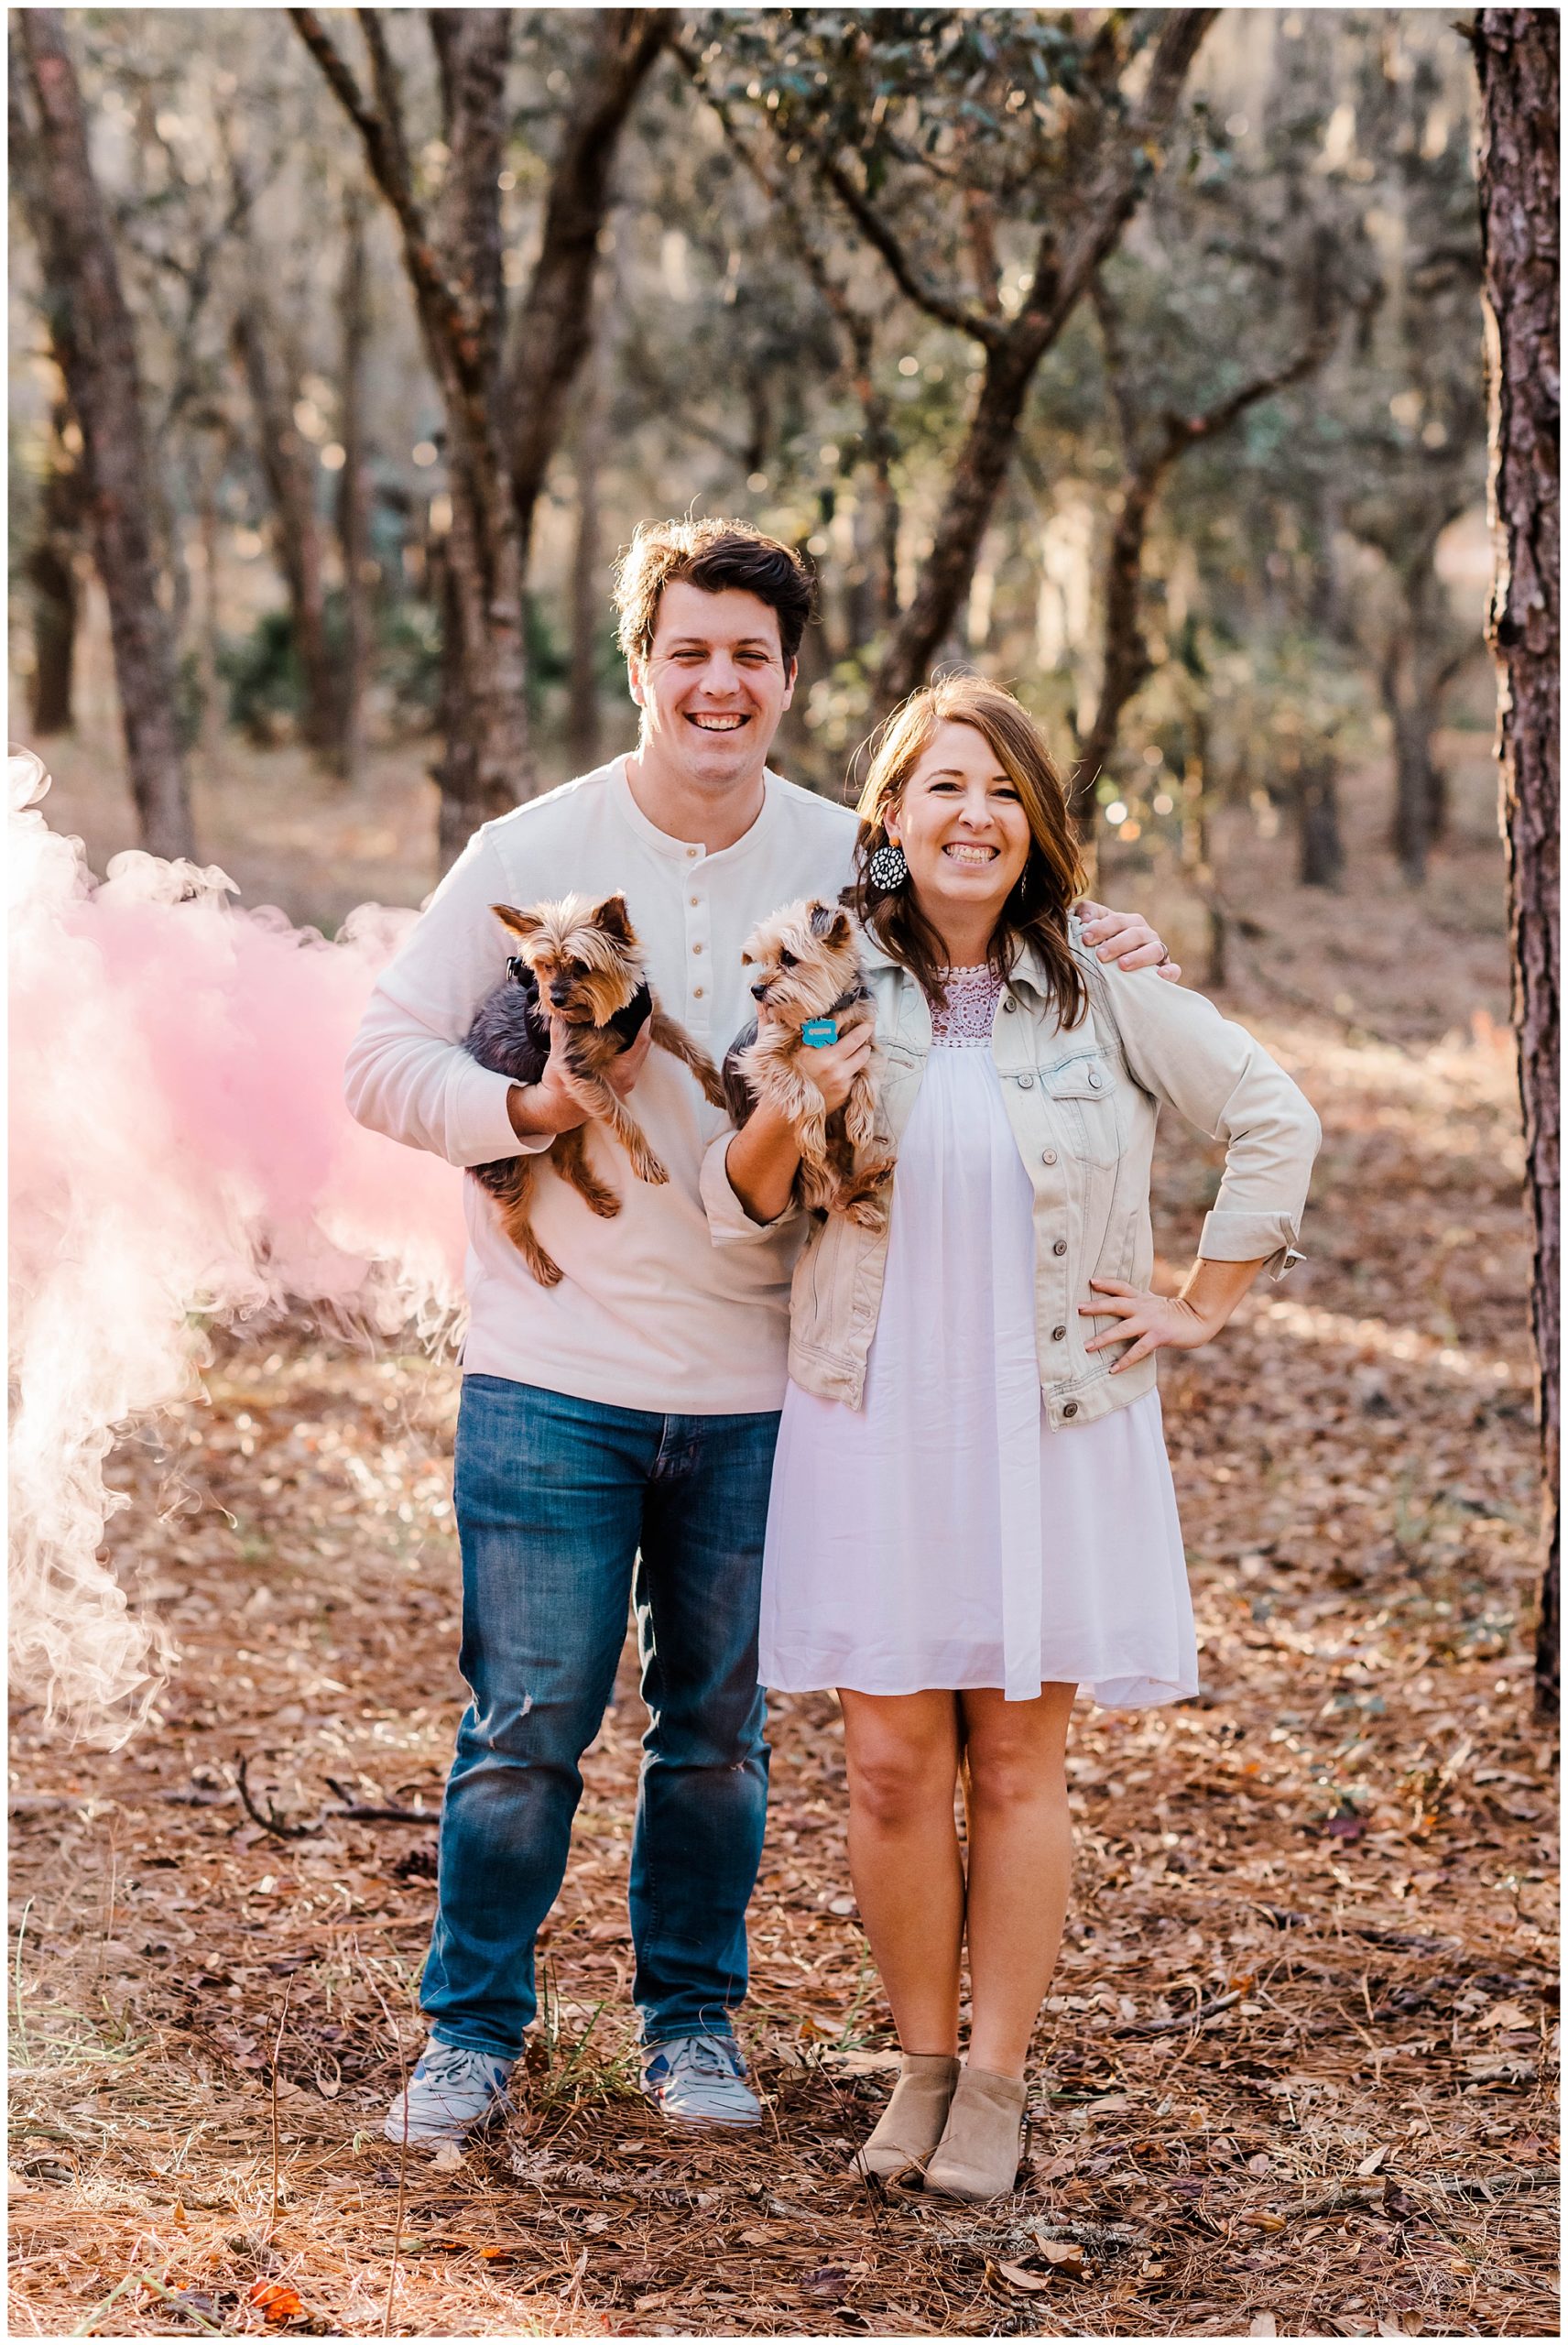 Lake Louisa State Park Gender Reveal Session | Haleigh Nicole Photography | This gender reveal session at Lake Louisa State Park in Clermont, Florida featured pink gender reveal smoke bombs for the couple's baby girl. #genderreveal #smokebombs #genderrevealsmokebombs #lakelouisa #orlandoportraitphotographer #orlandomaternityphotographer #orlandoflorida